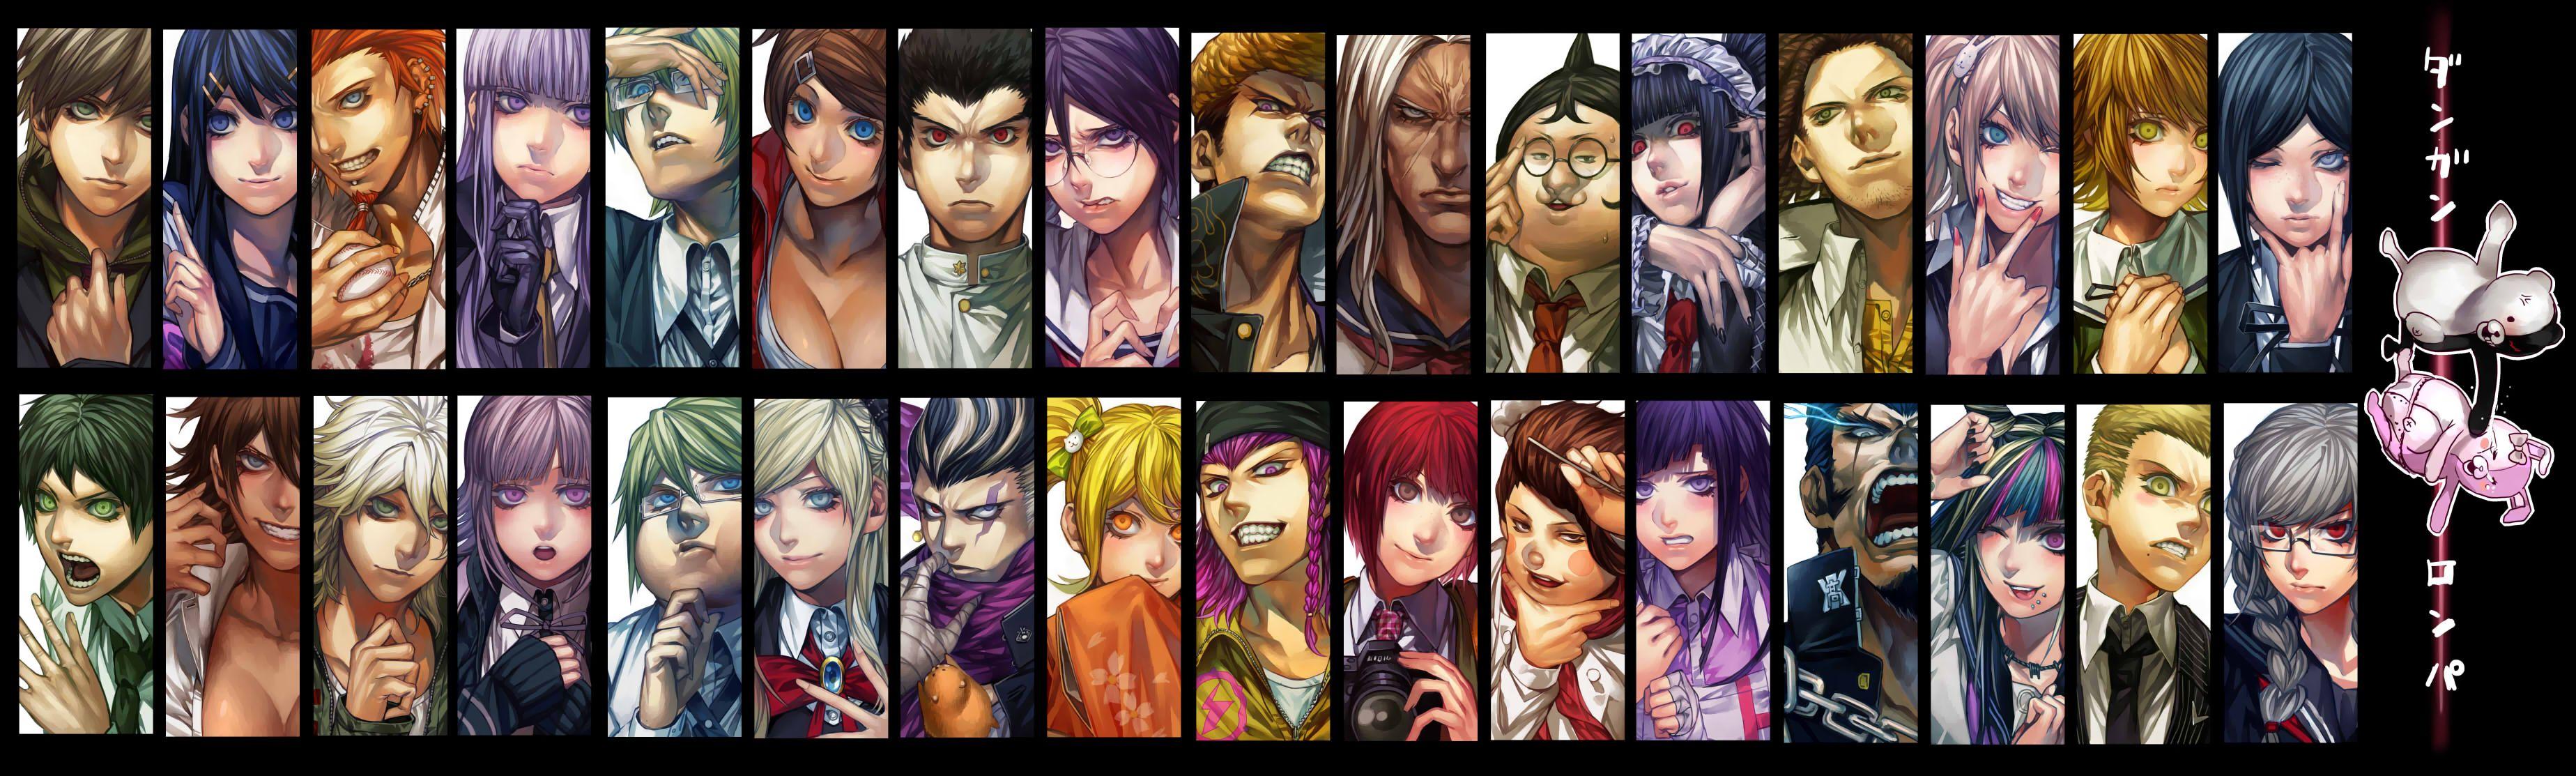 image about The dangan ronpa page. Right guy